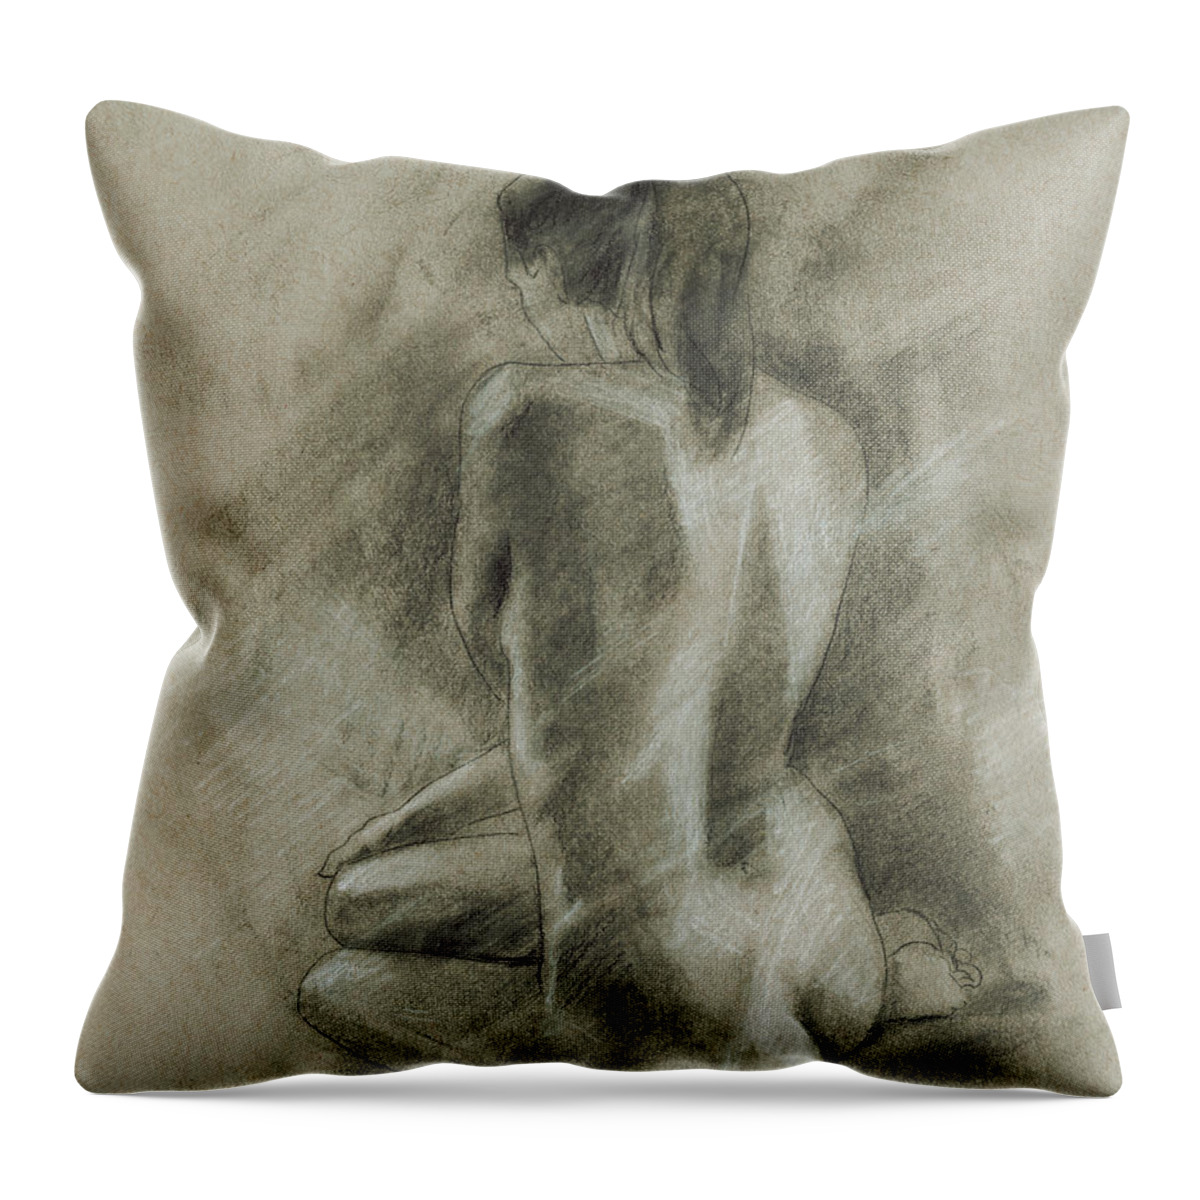 Figurative Throw Pillow featuring the painting Charcoal Figure Study II by Ethan Harper